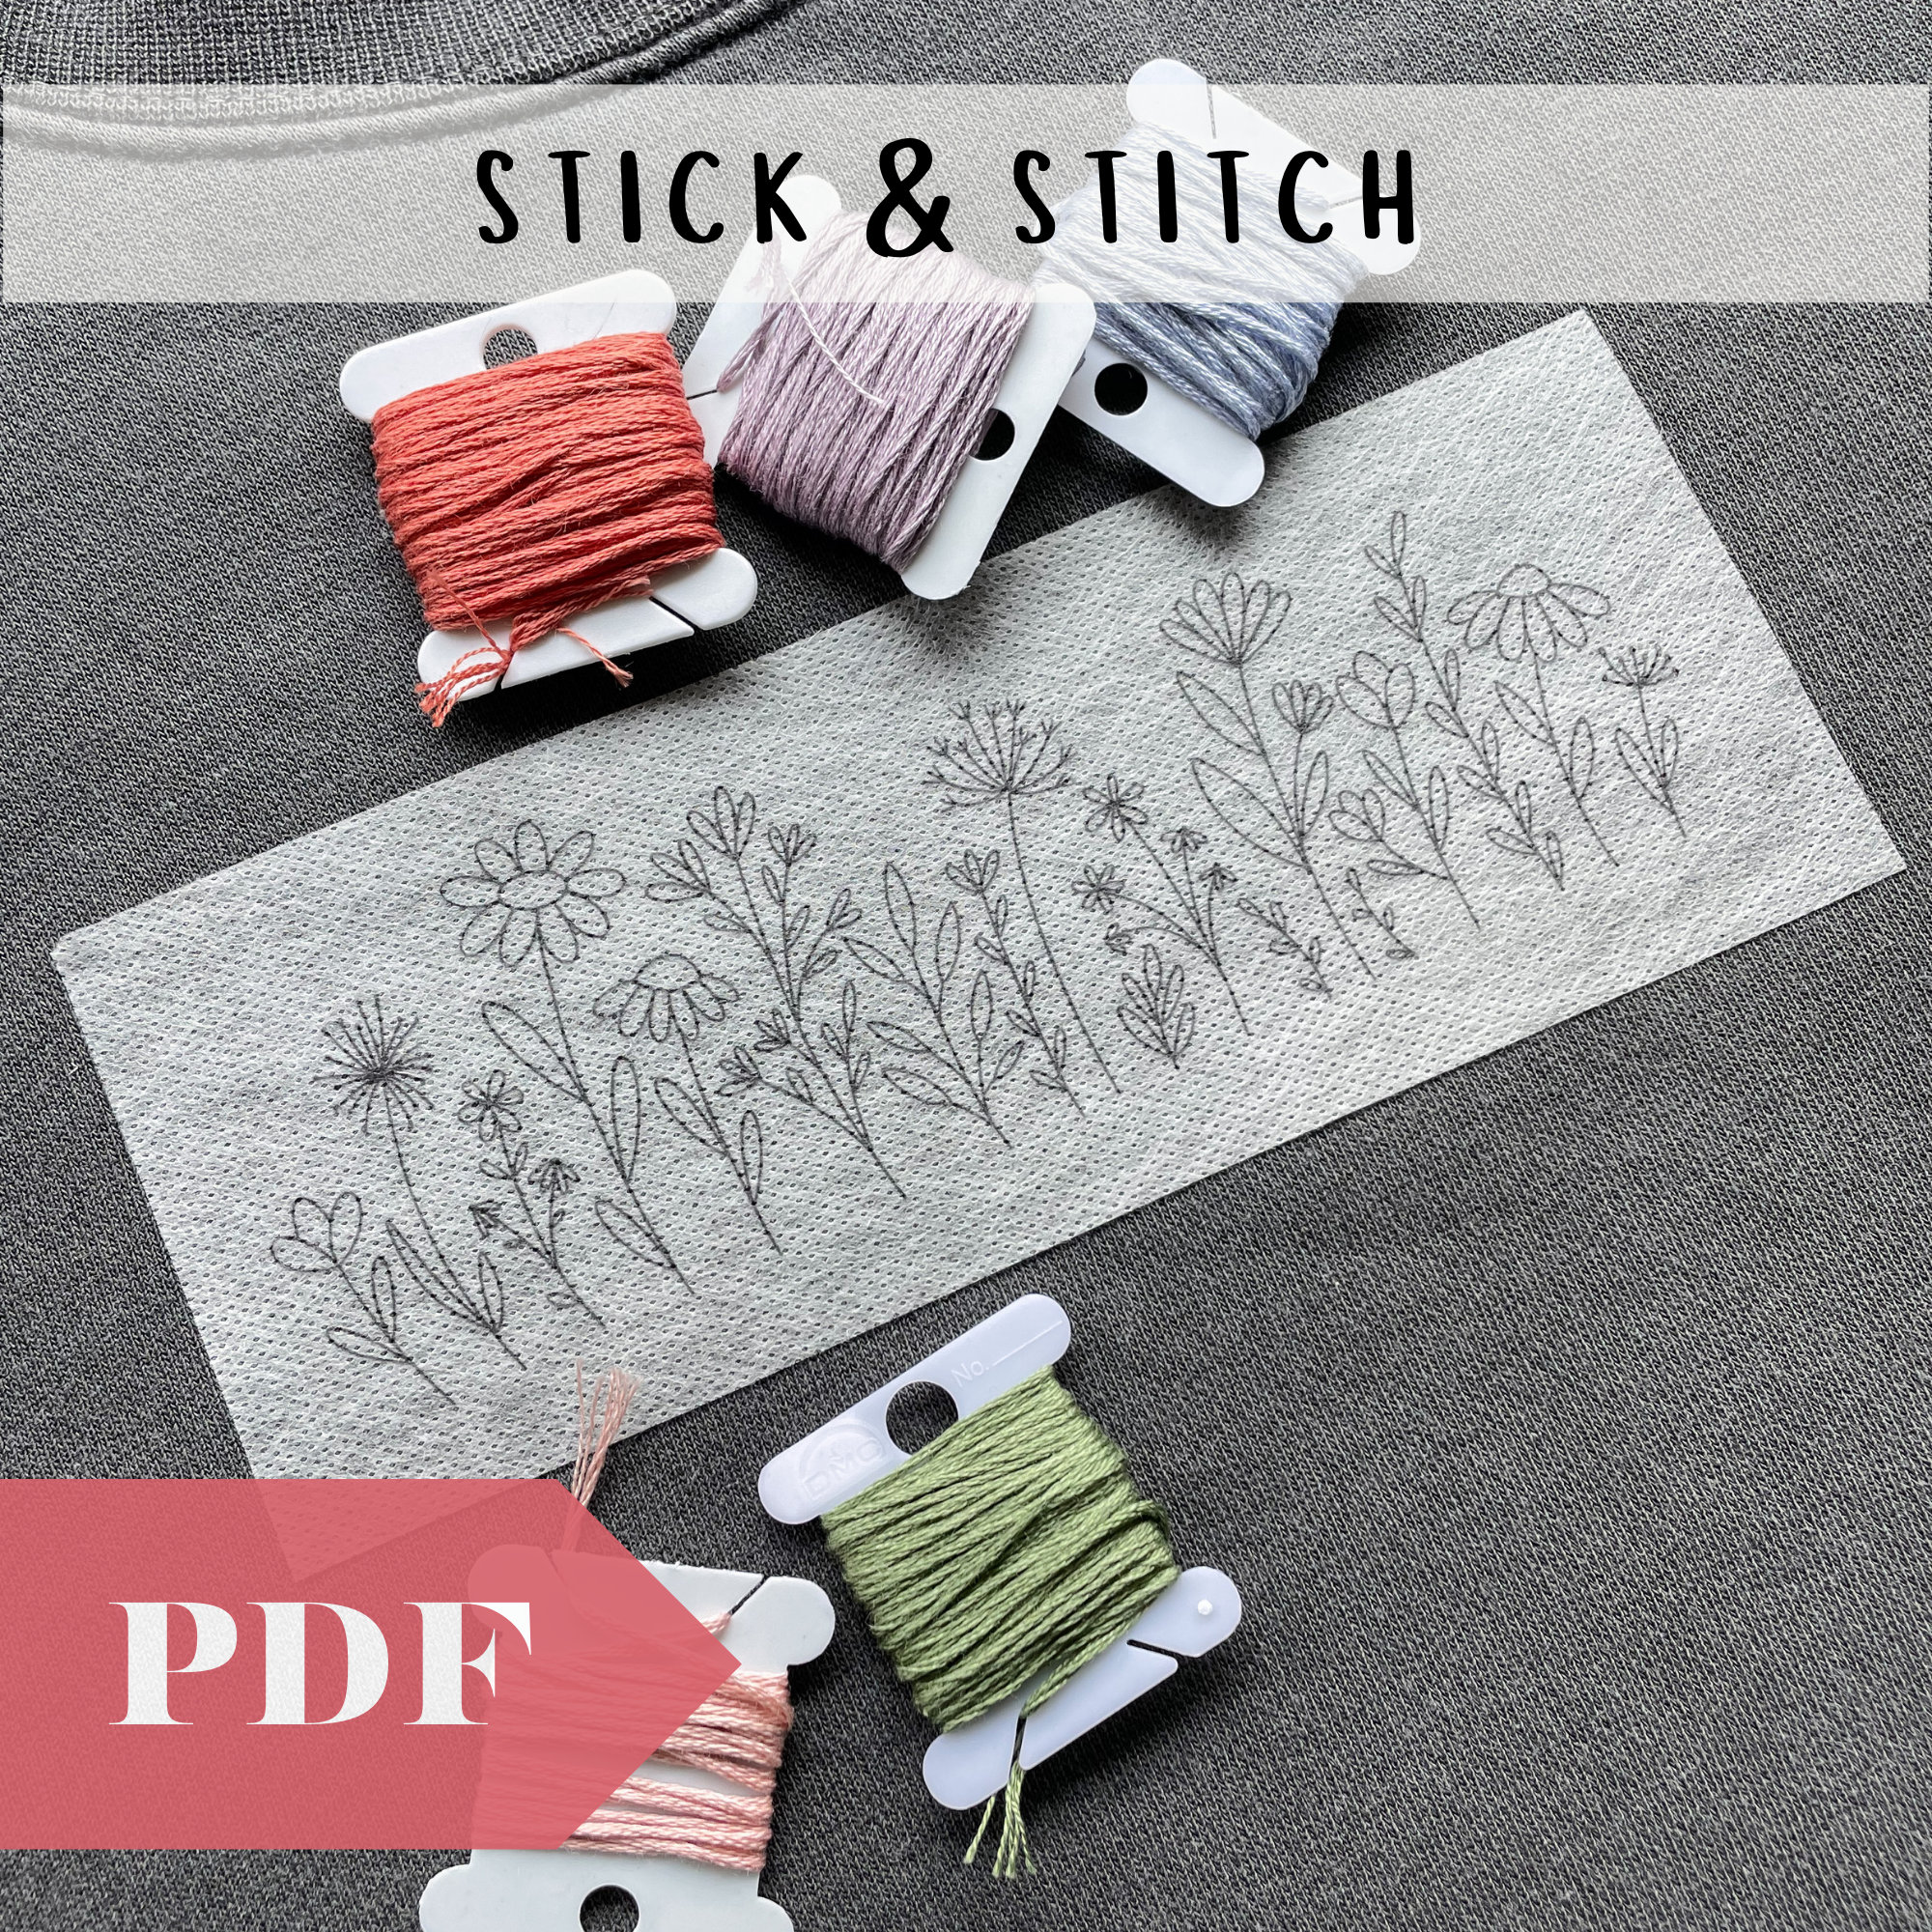 STICK AND STITCH. 4 Embroidery Stickers. Flowers for Paula. Stick, Embroider  and Dissolve. Embroidery Stickers. Soluble in Water. Easy 